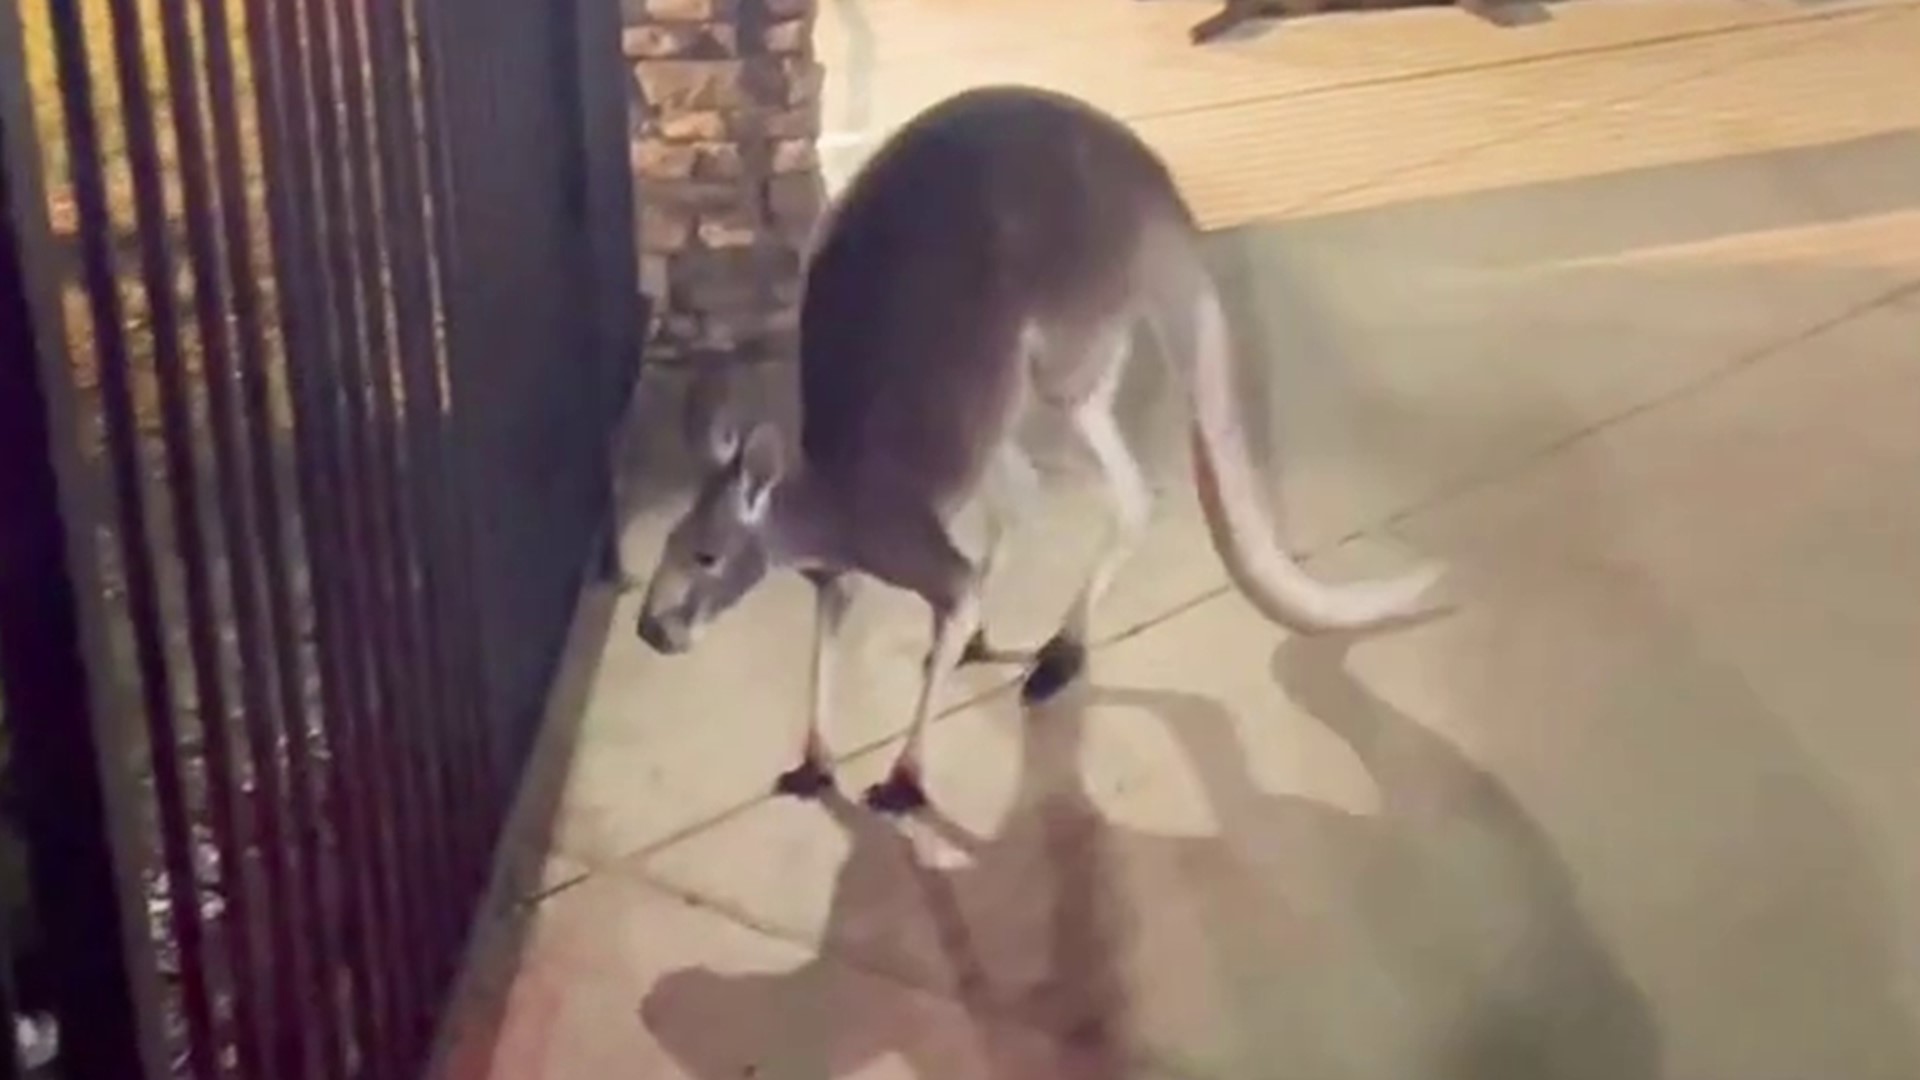 Hillsborough County Sheriff's Office deputies responded to a Tampa apartment complex after a kangaroo got loose Thursday morning.